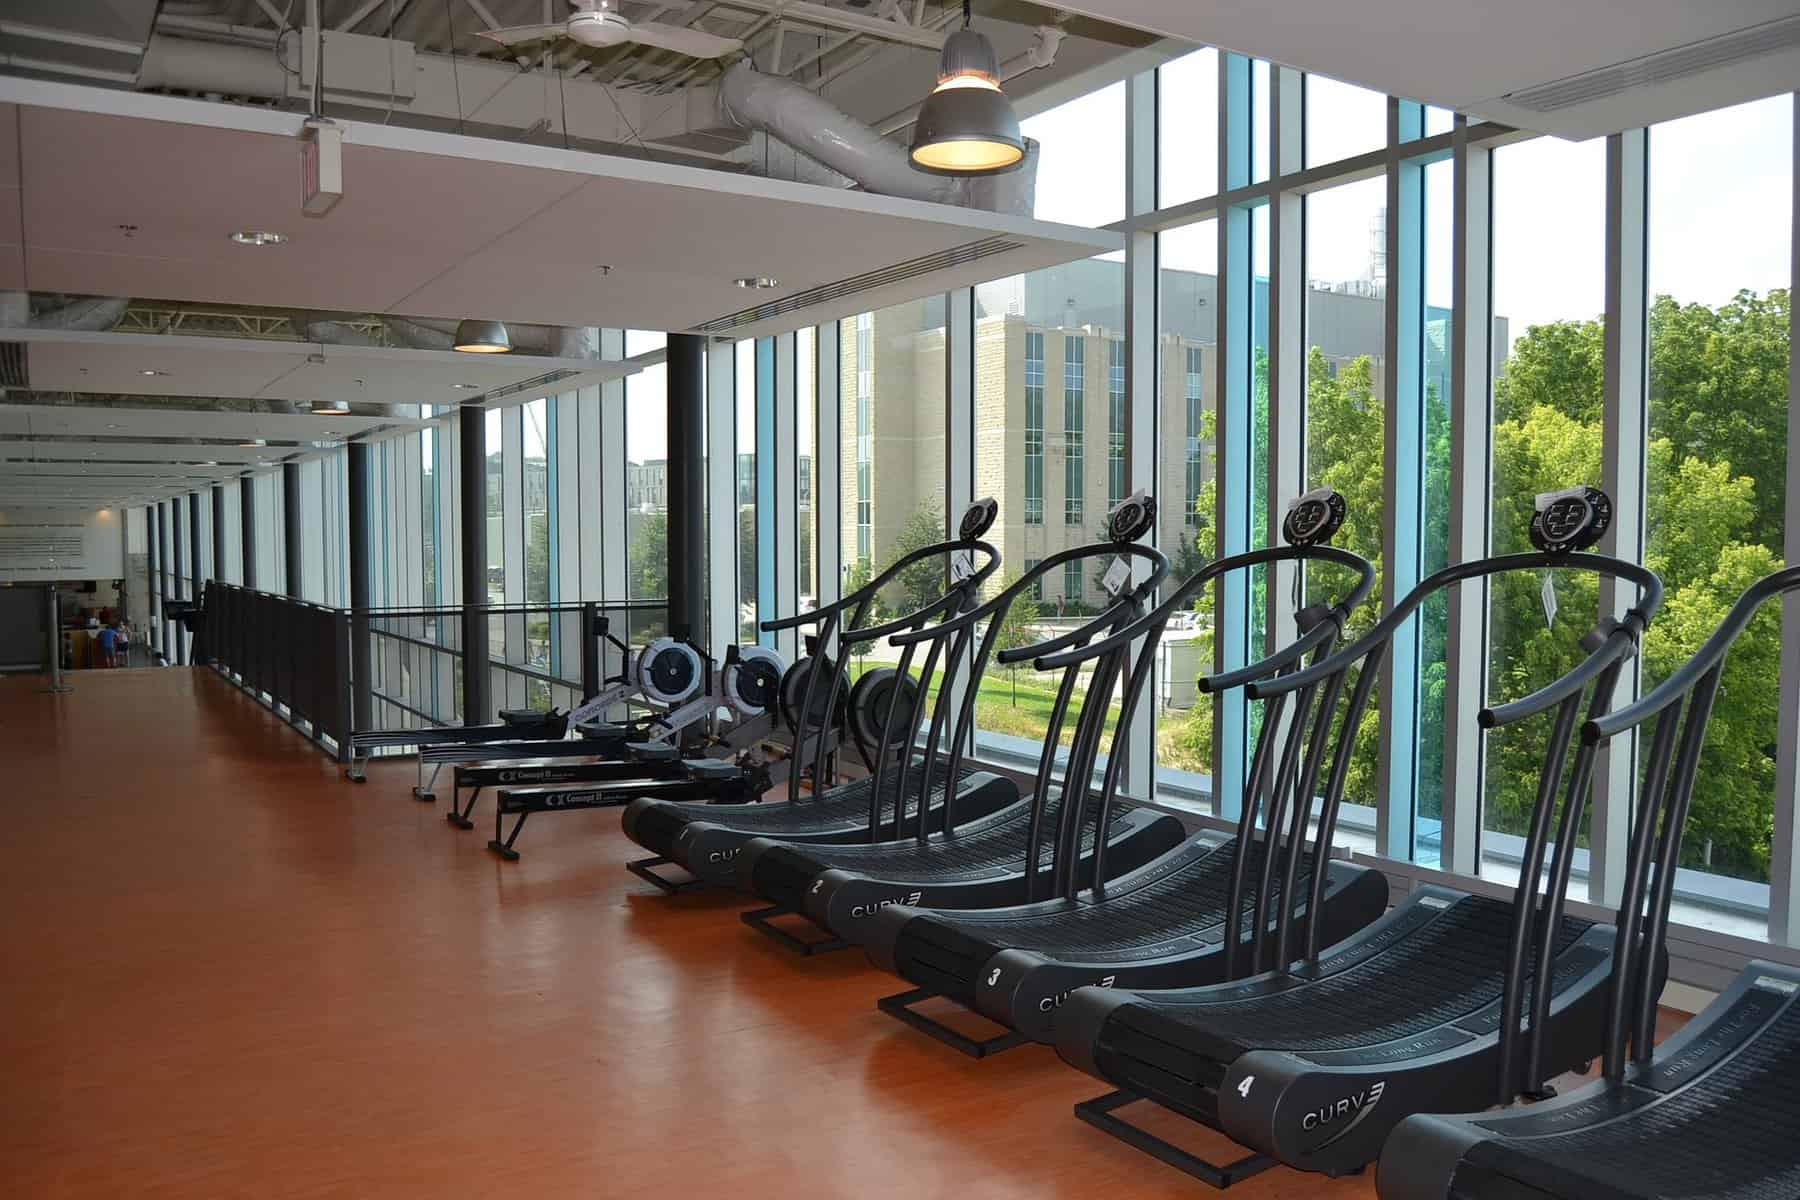 Treadmills are seen lined up facing a window.